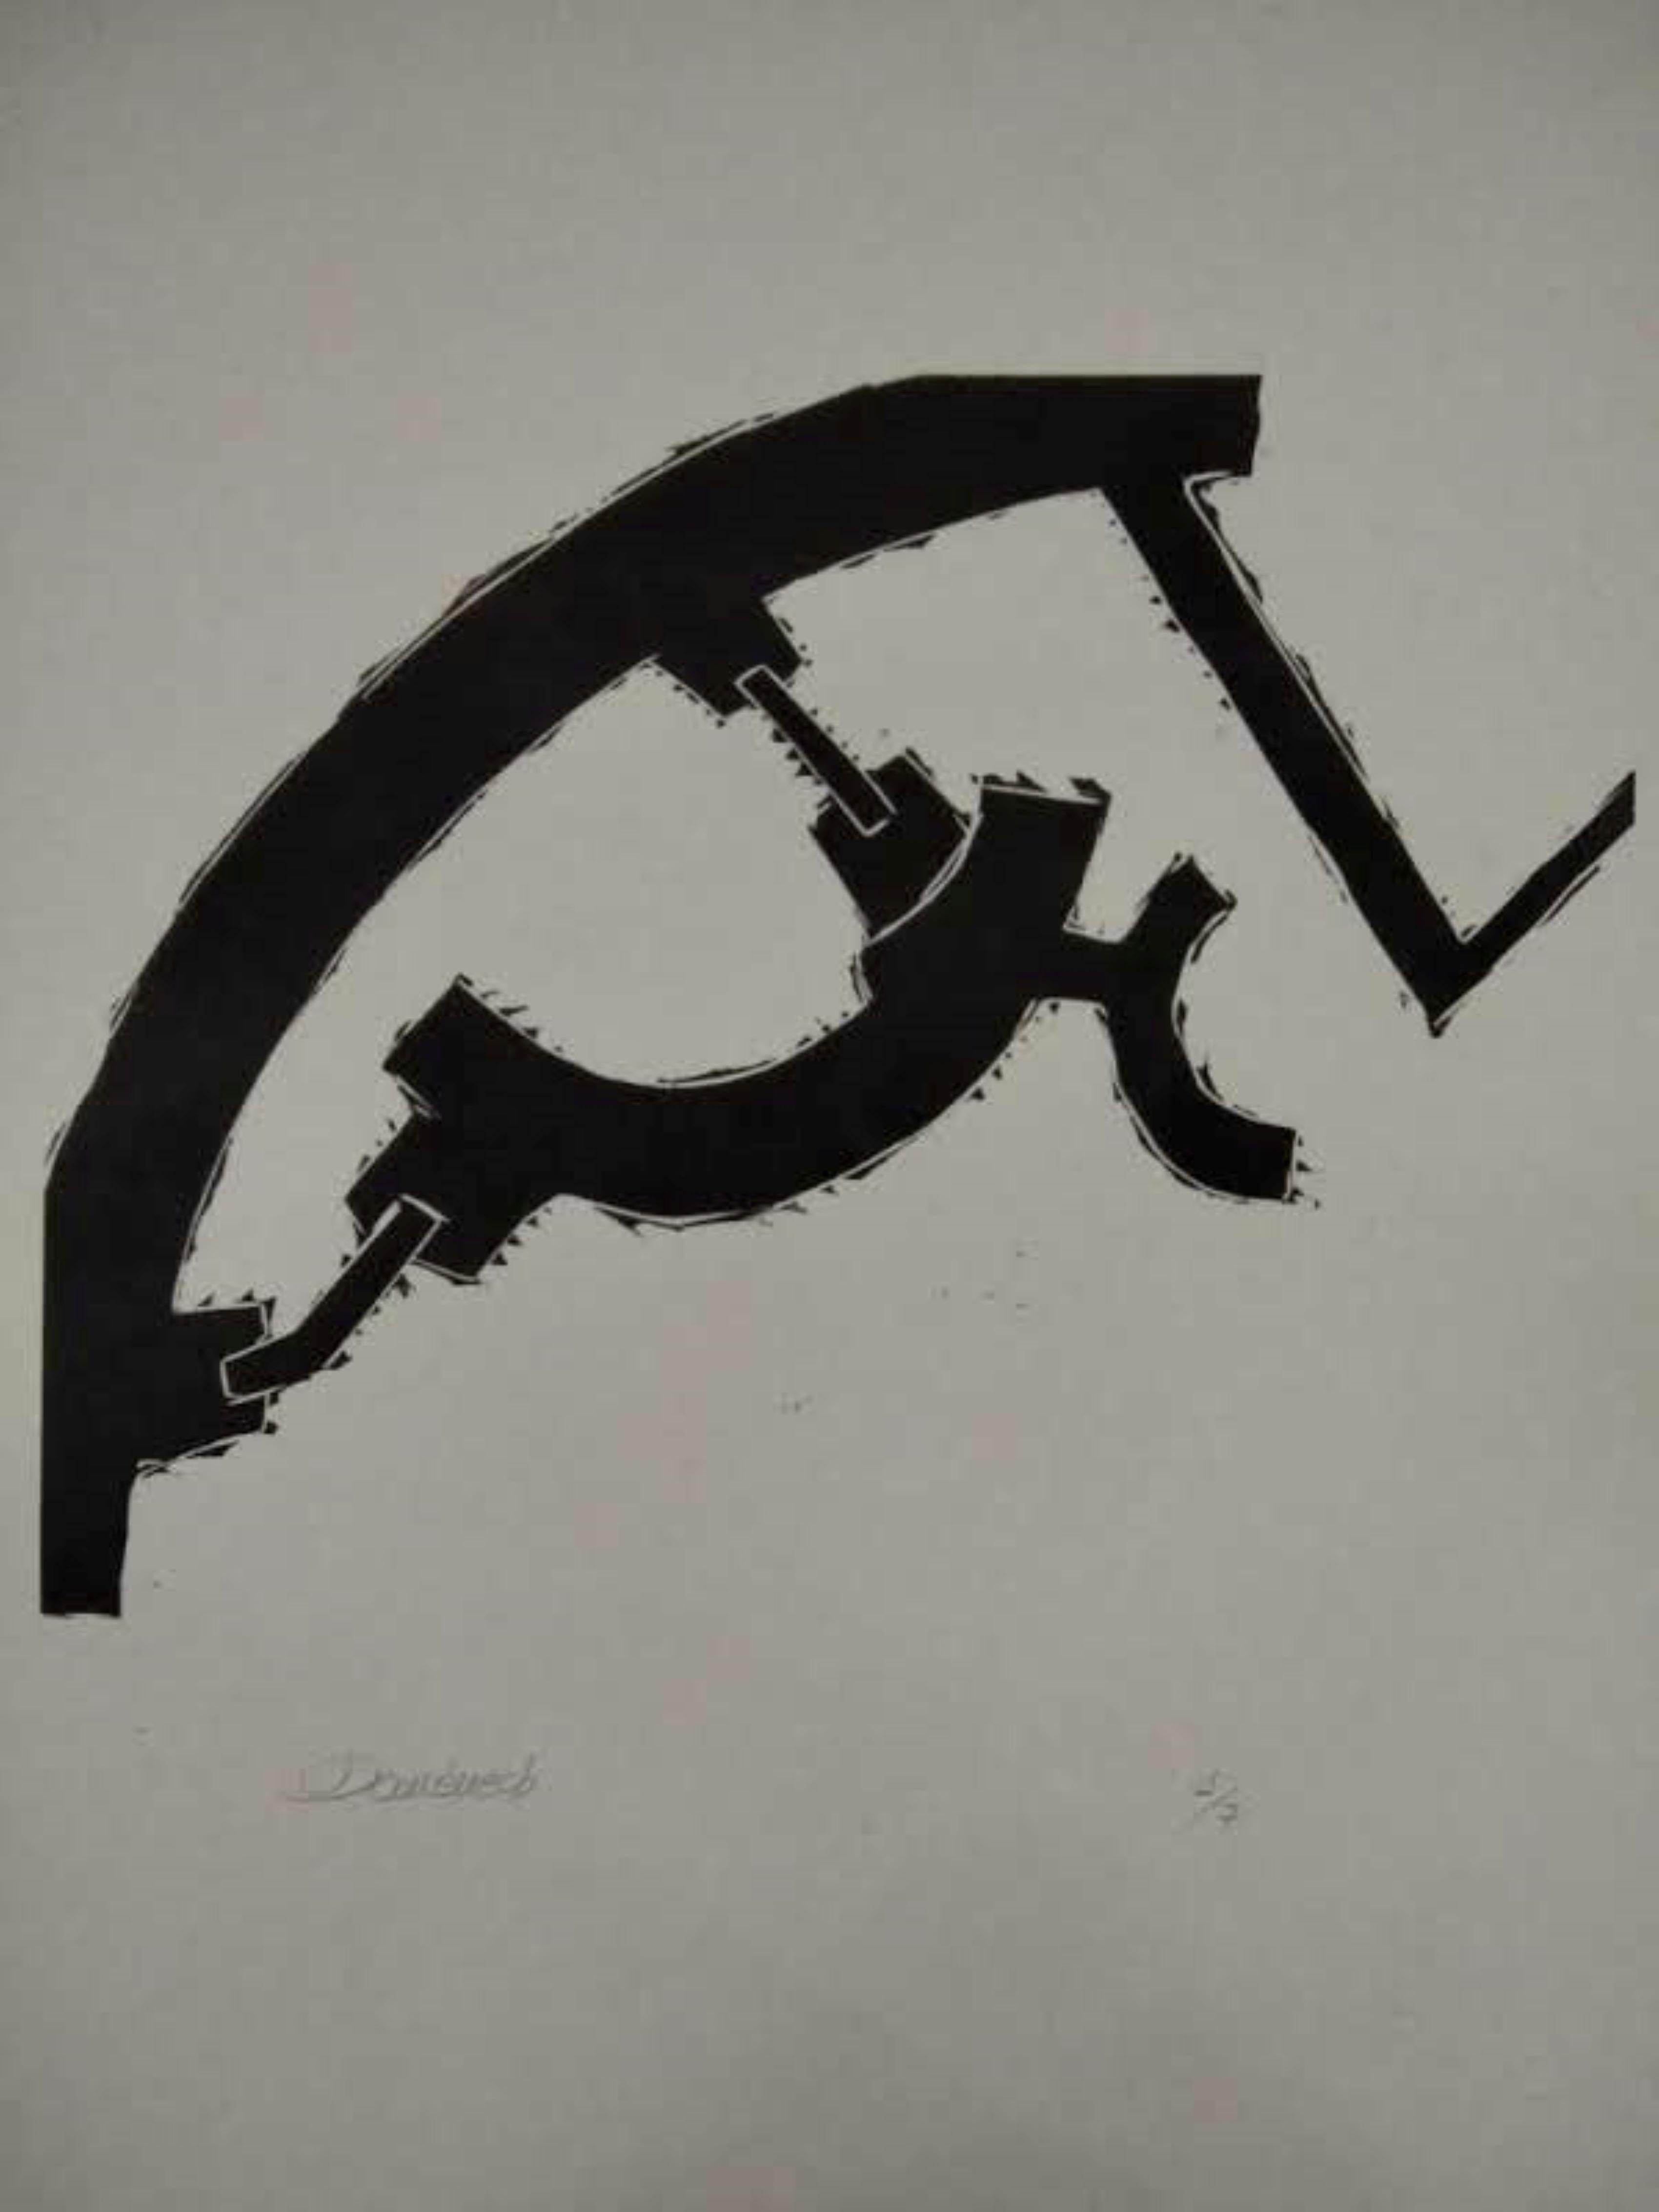 Domenech Abstract Print - Untitled